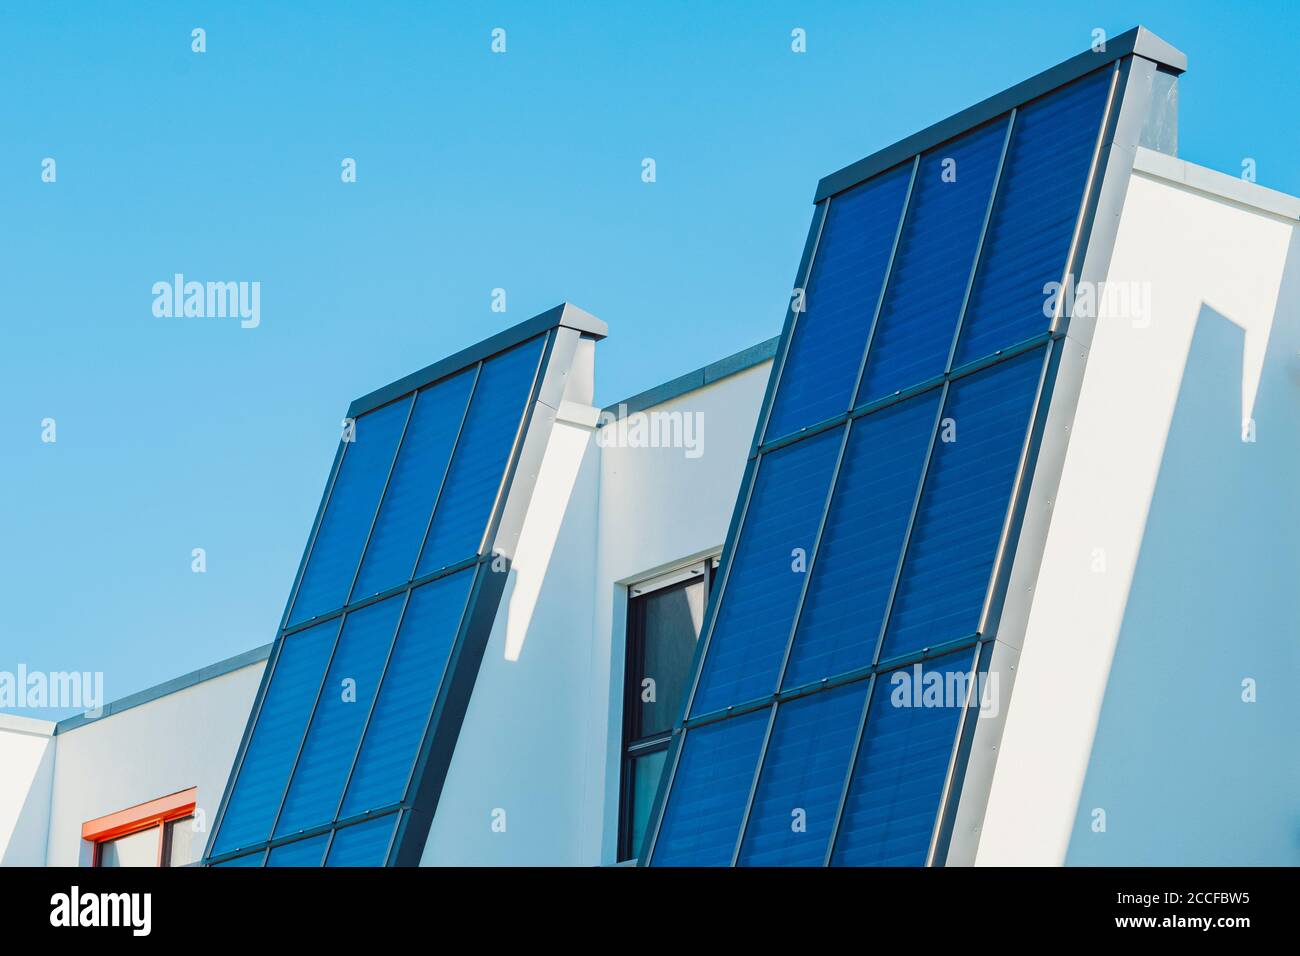 Germany, solar energy, solar roof, photovoltaic, residential building Stock Photo